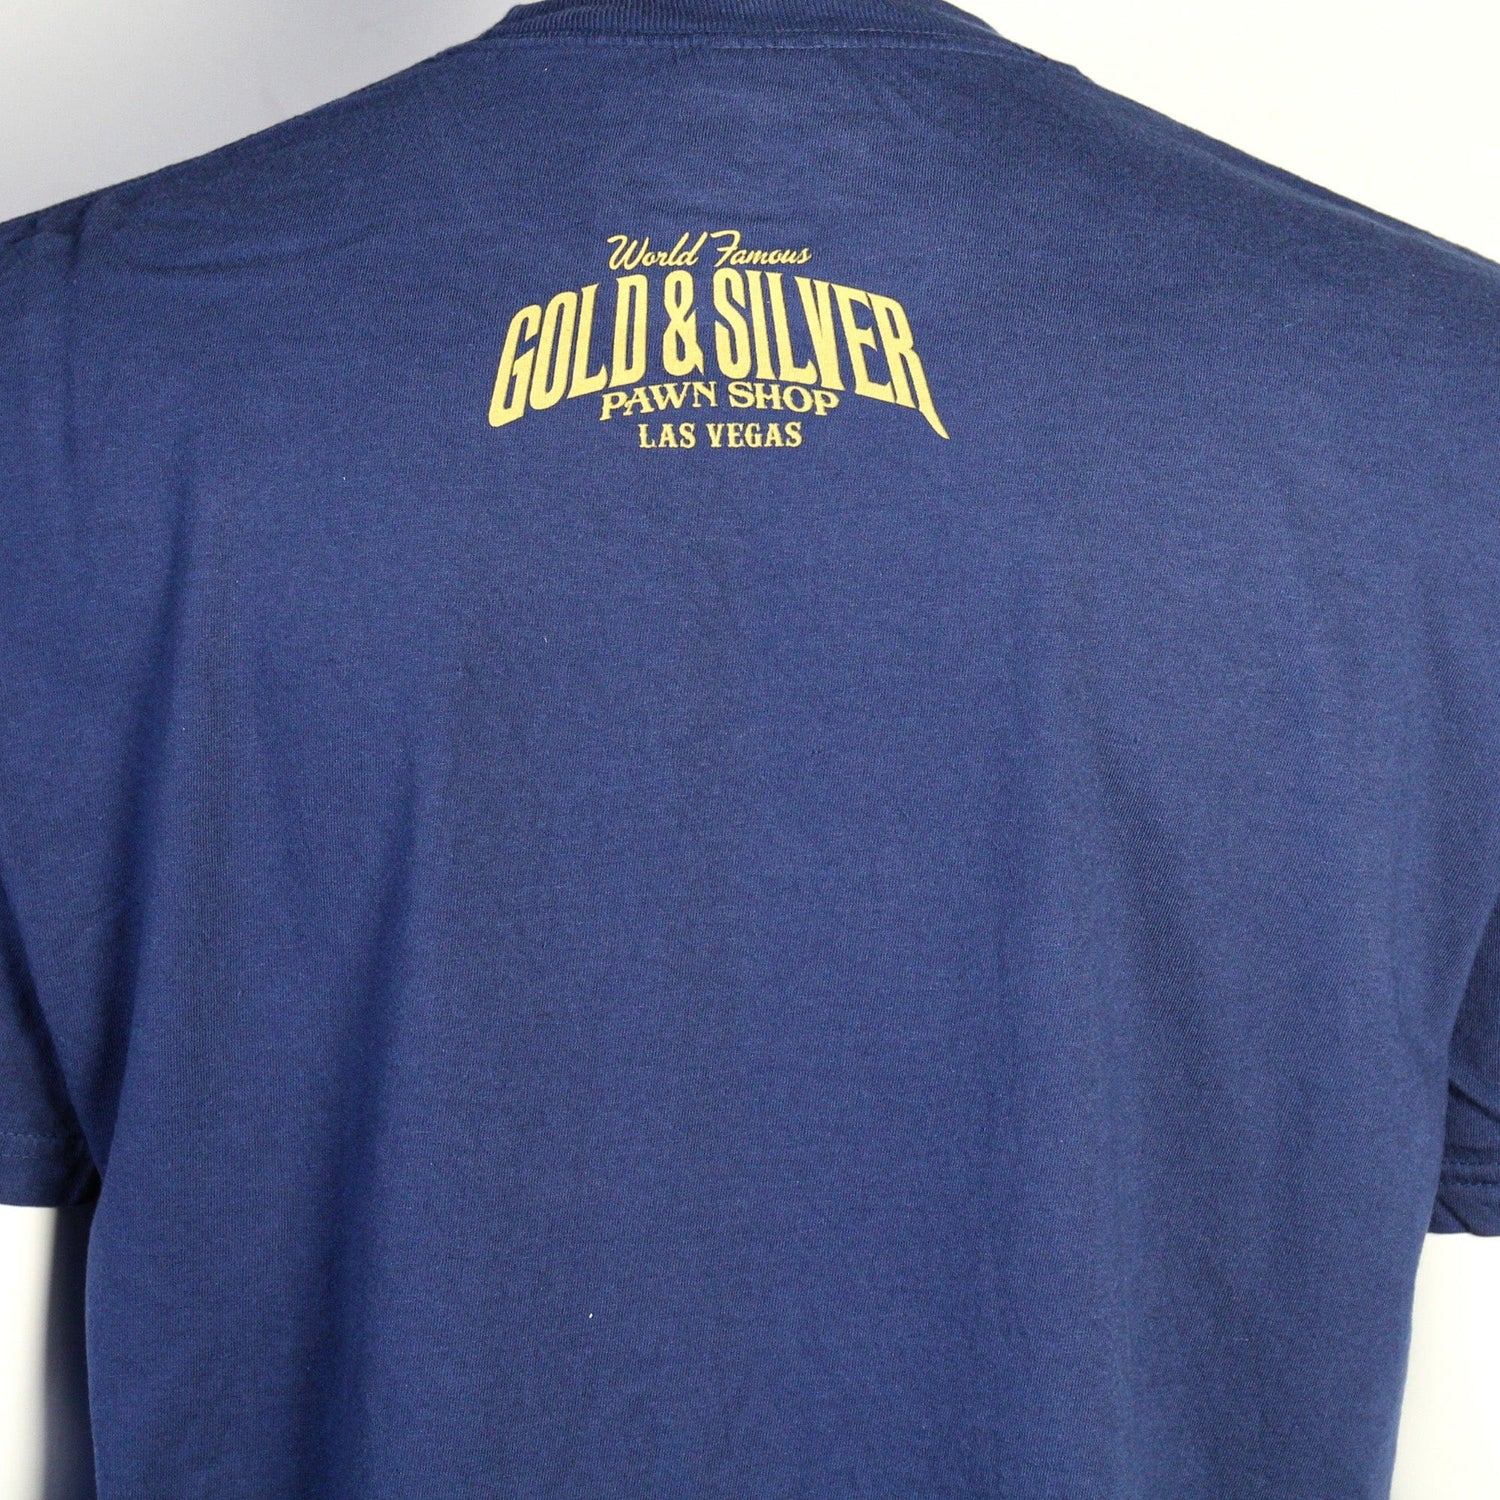 World Famous Gold & Silver Pawn Shop Championship Ring T-Shirt  Text